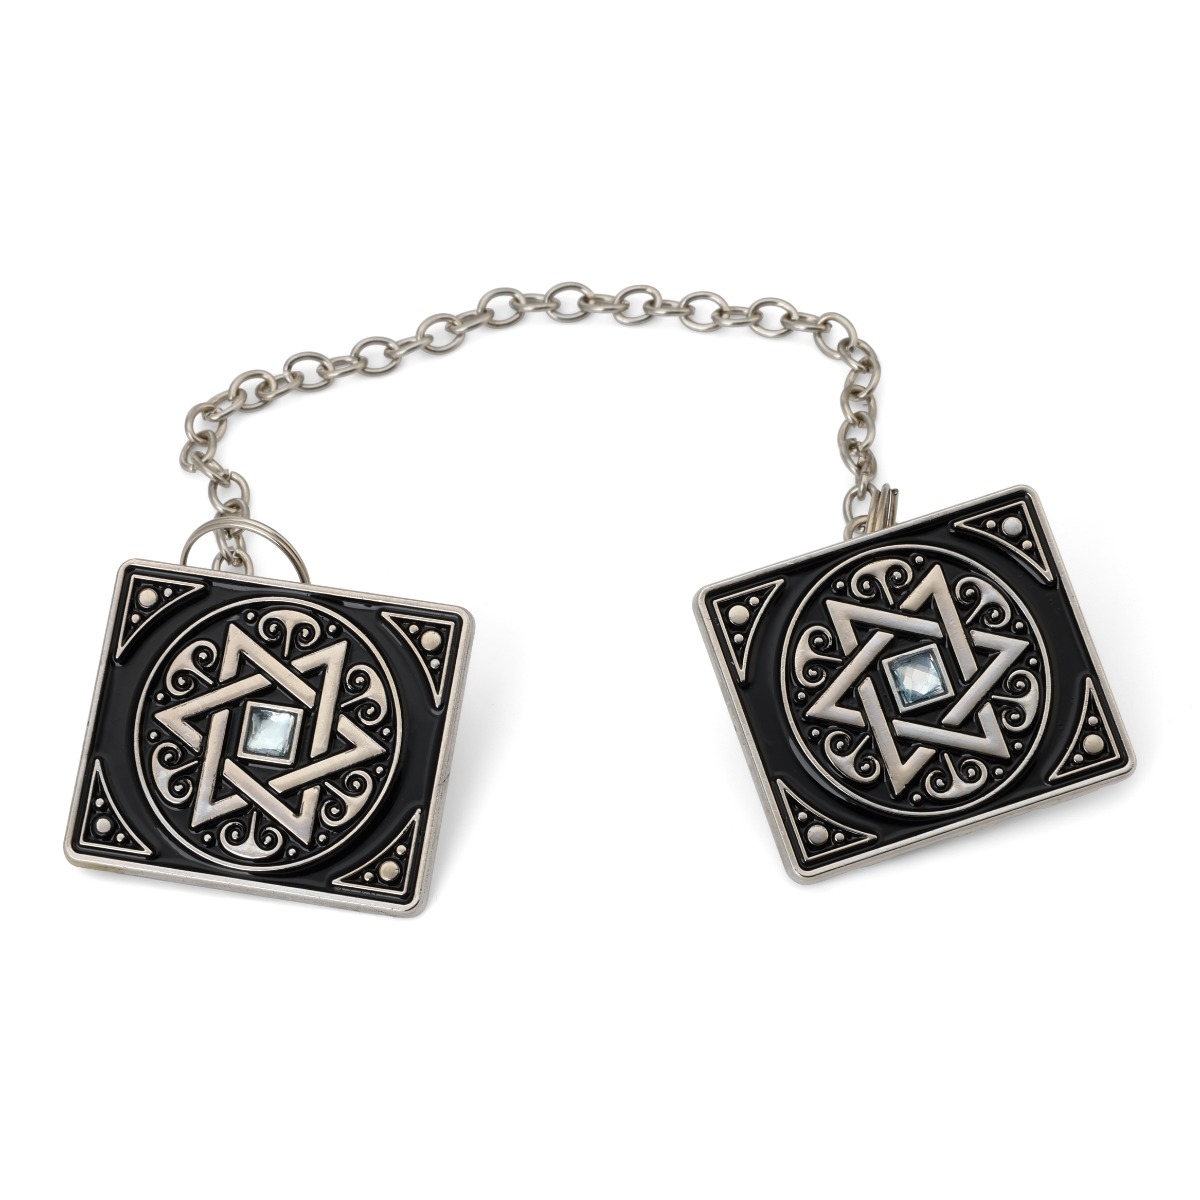 Nickel Star of David Tallit Clips with Blue Stone - 1